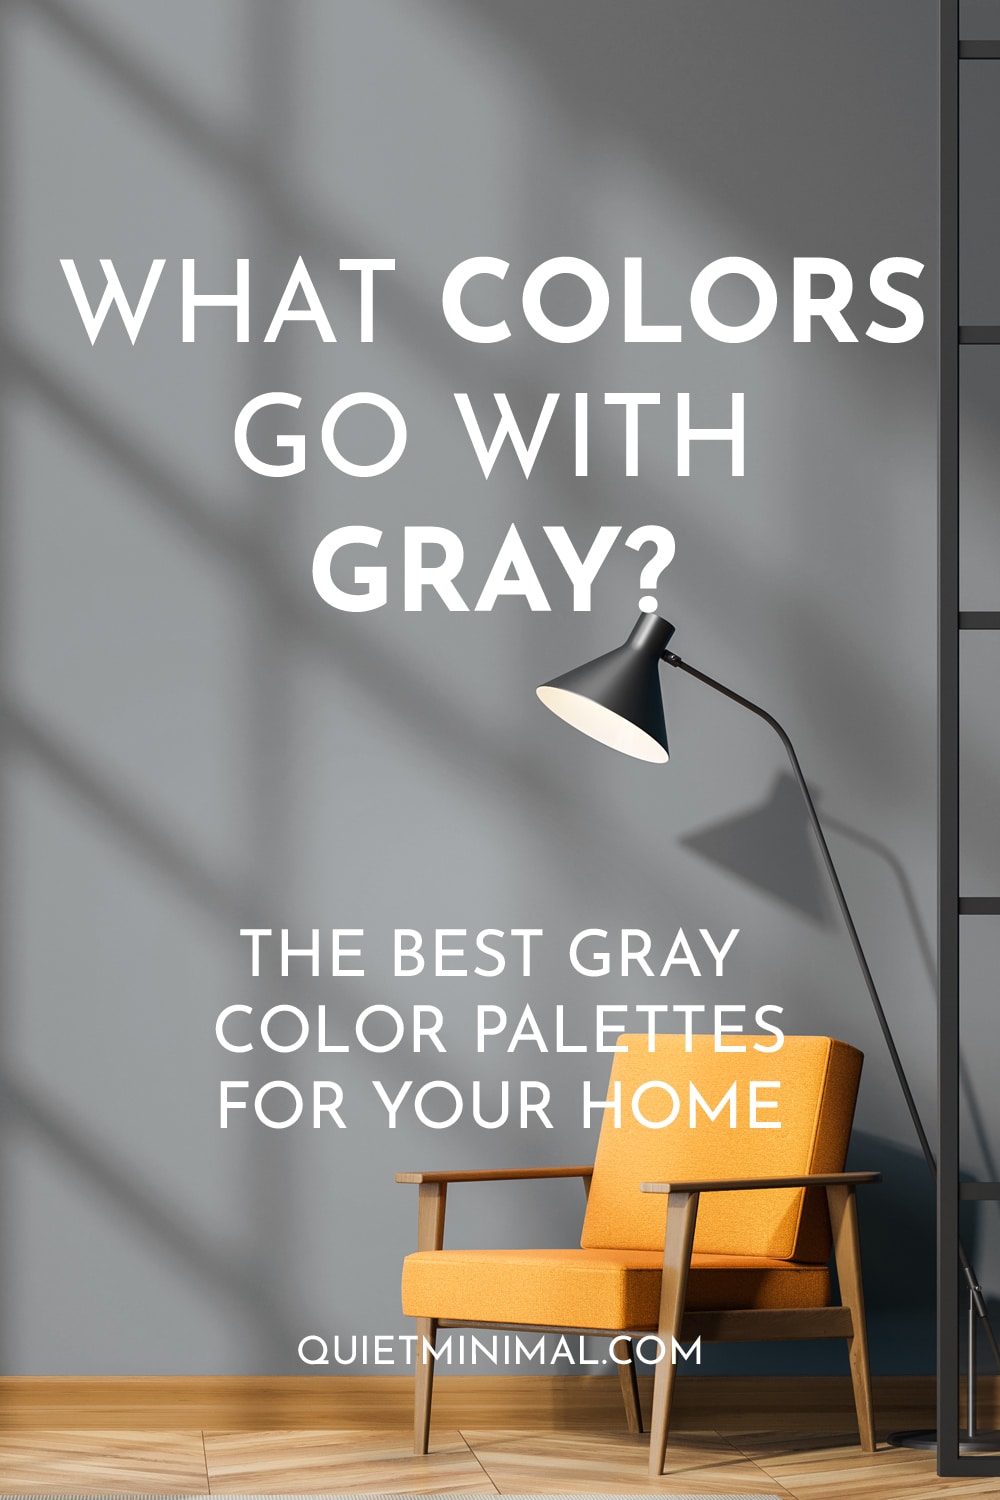 What colors go with gray, the best gray color palettes for your home